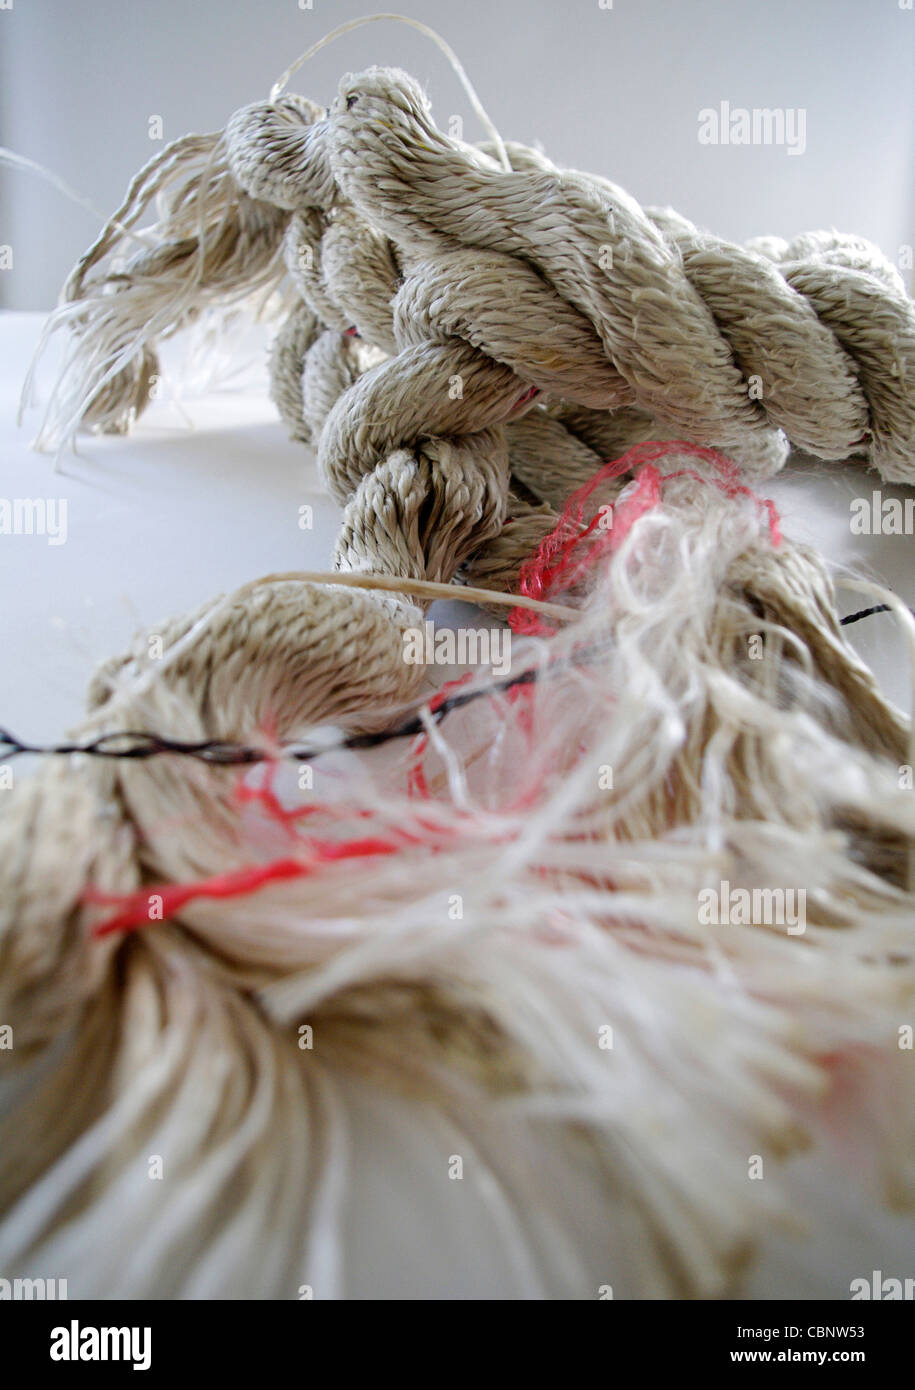 Neatly twisted multi-ply rope coming apart into a disorganized tangle of loose ends Stock Photo